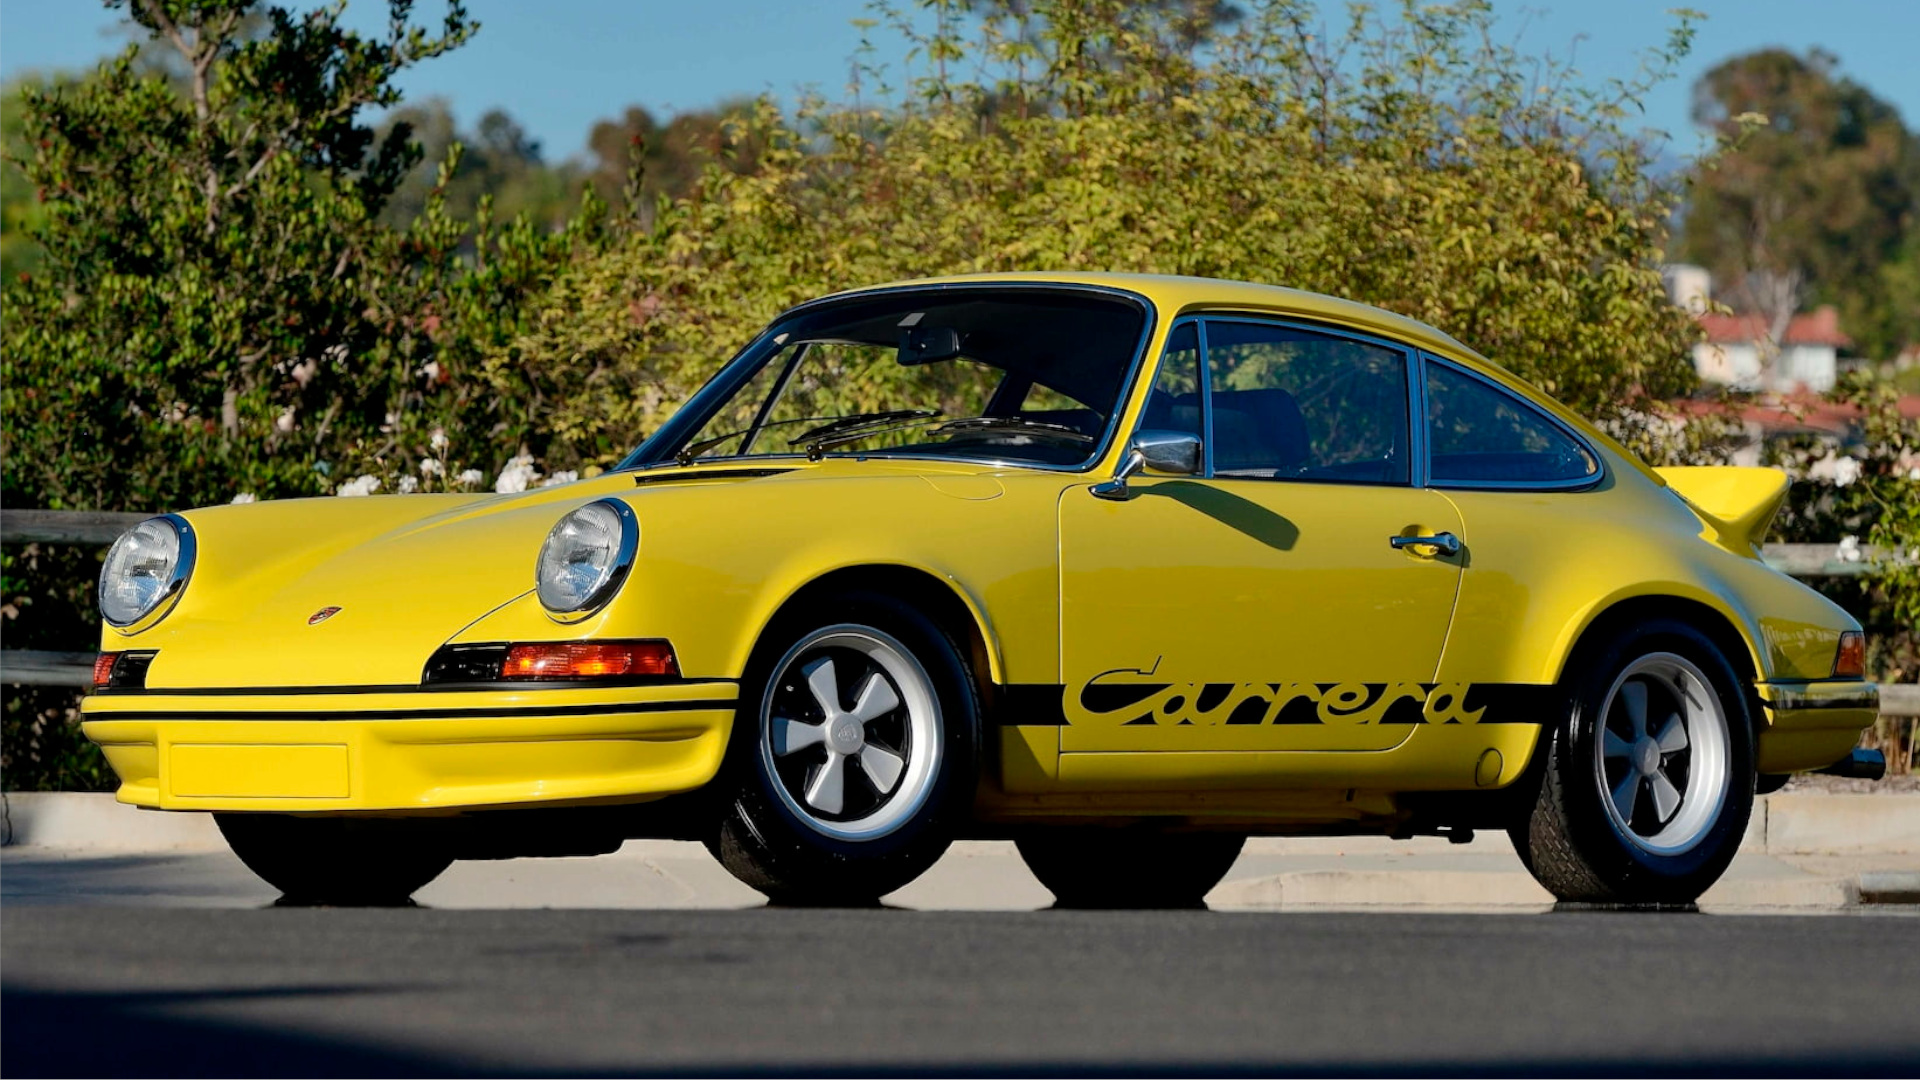 Paul Walker's 1973 Porsche 911 Carrera RS  Could Sell for $1M